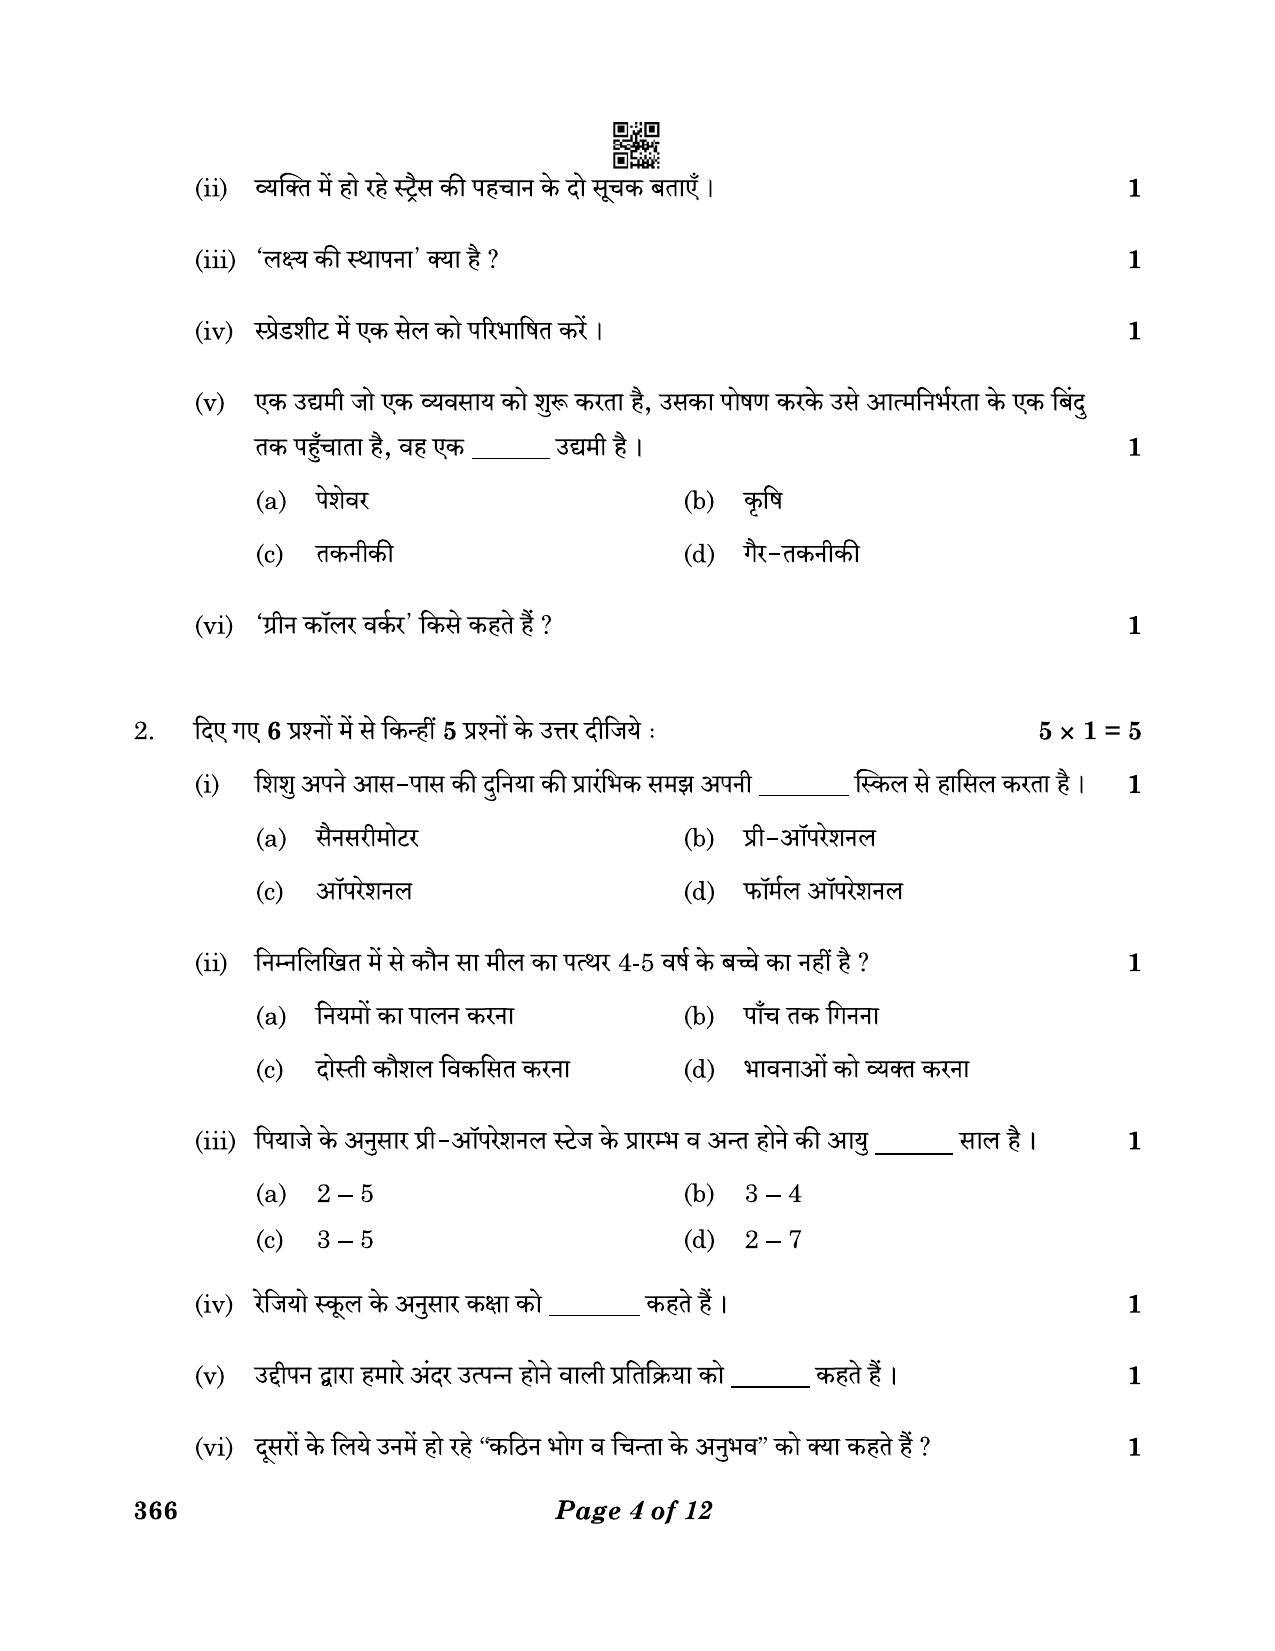 CBSE Class 12 366_Early Childhood Care & Education 2023 Question Paper - Page 4